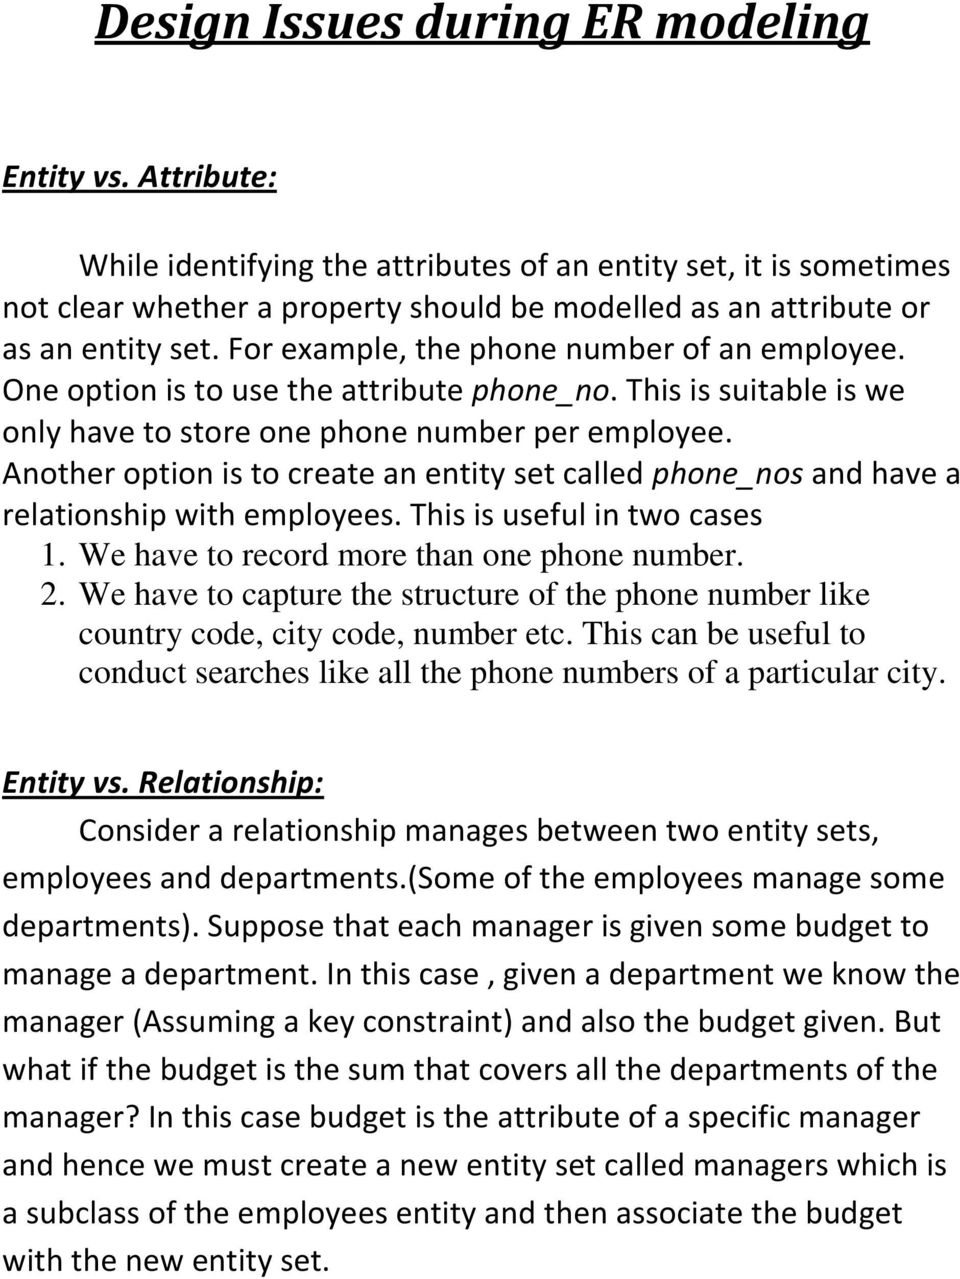 For example, the phone number of an employee. One option is to use the attribute phone_no. This is suitable is we only have to store one phone number per employee.